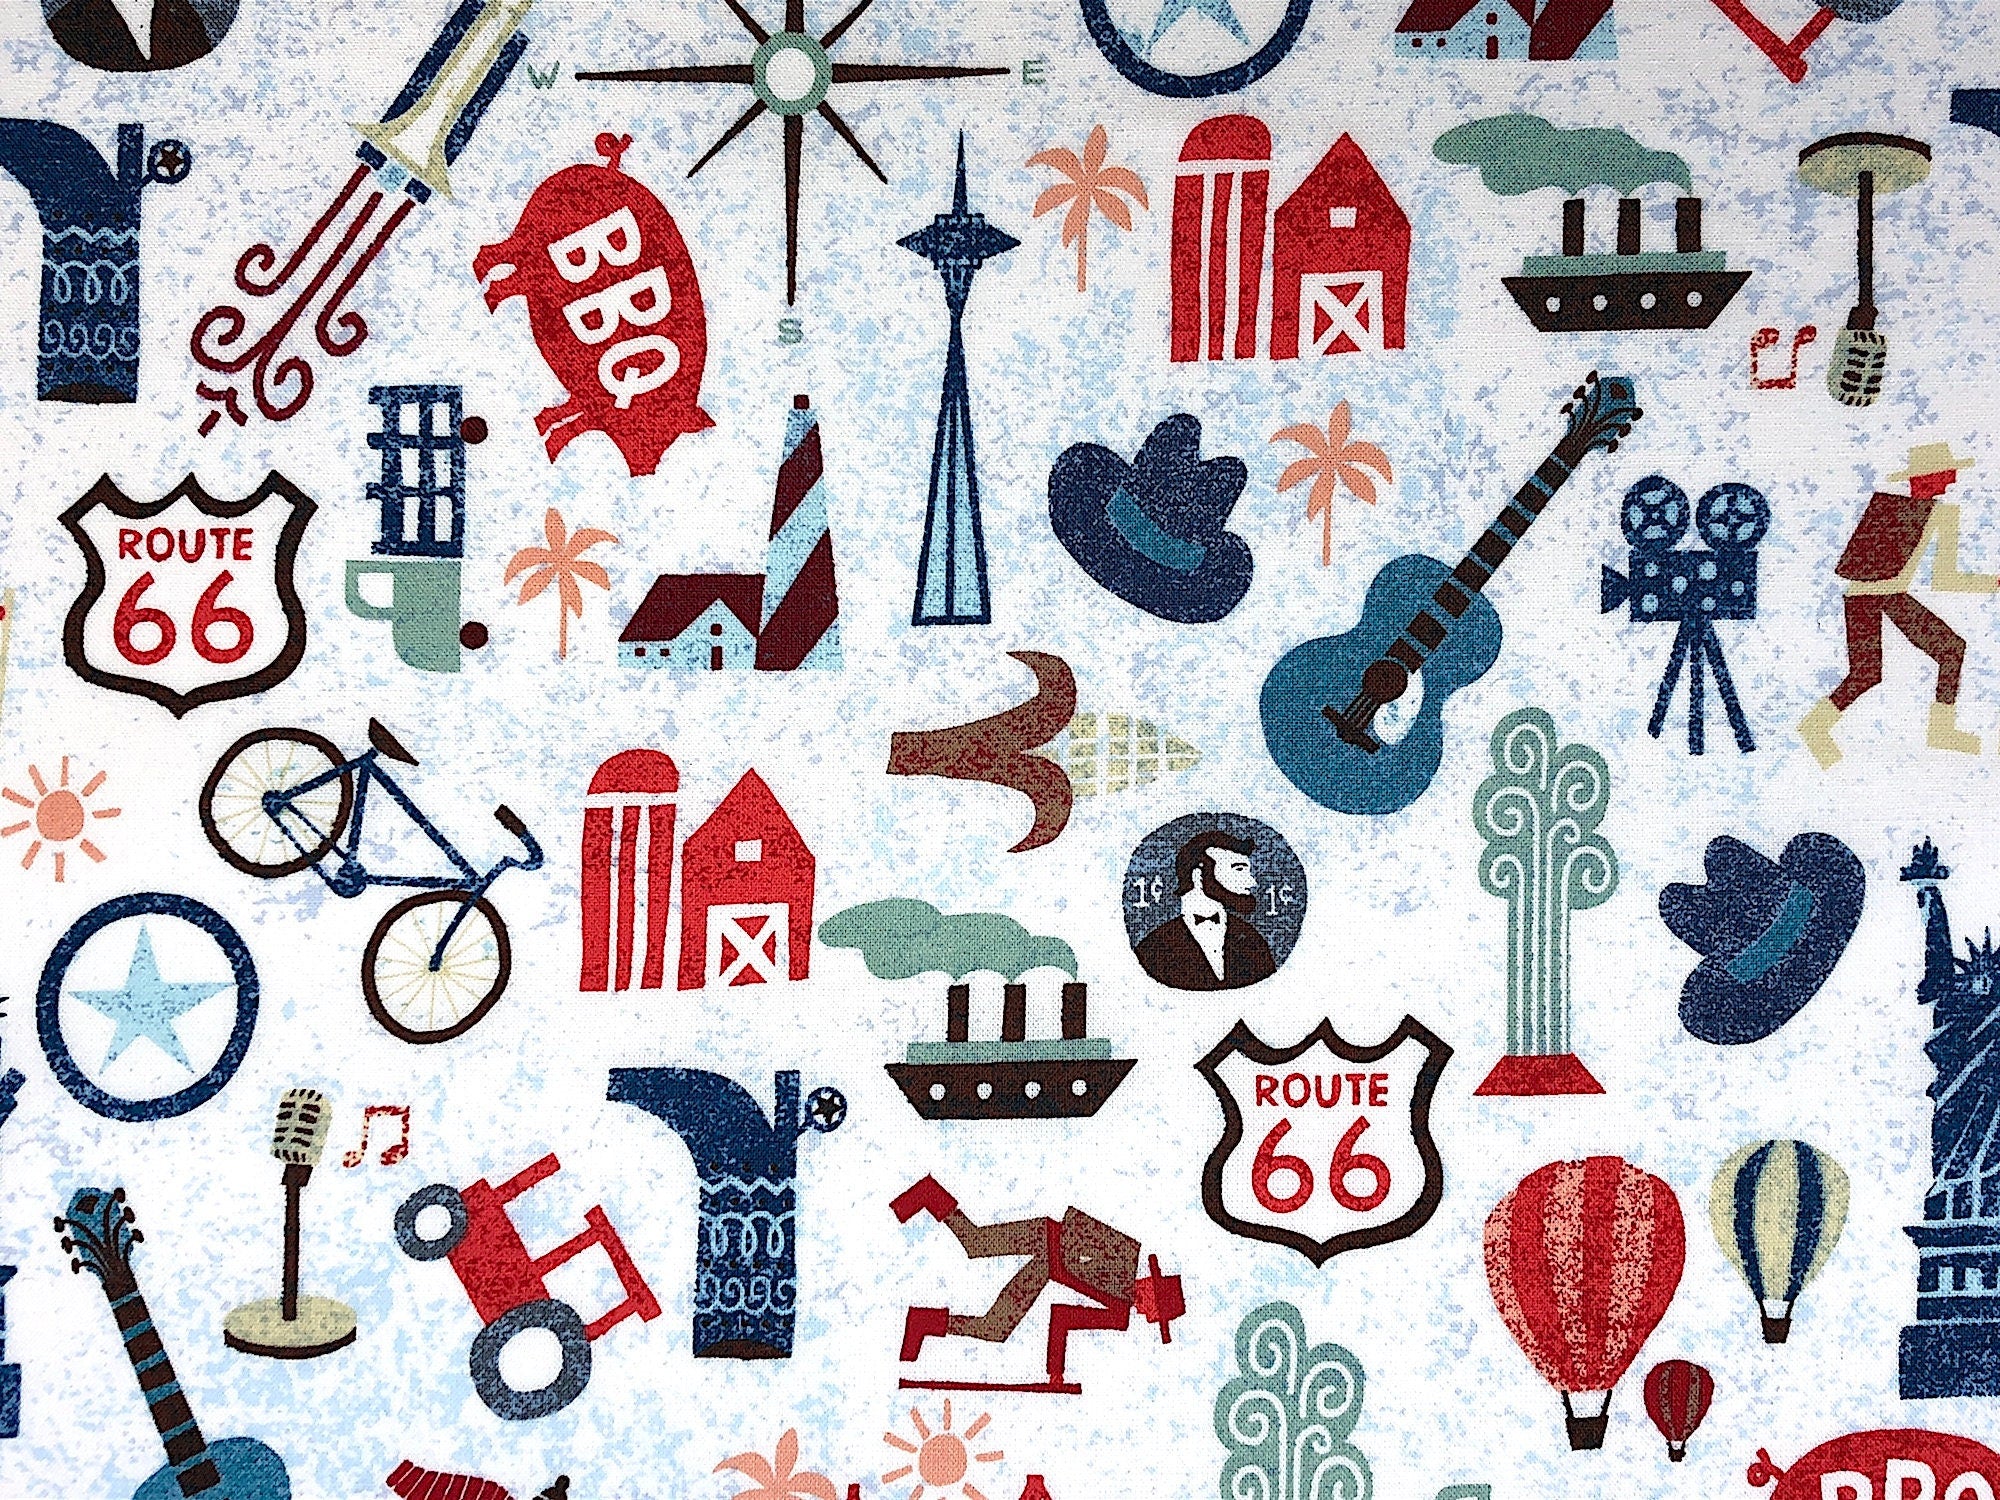 This fabric is called Across the USA and is covered with guitars, skiers, the statue of liberty, hot air balloons, cars, bicycles a BBQ pig and more.